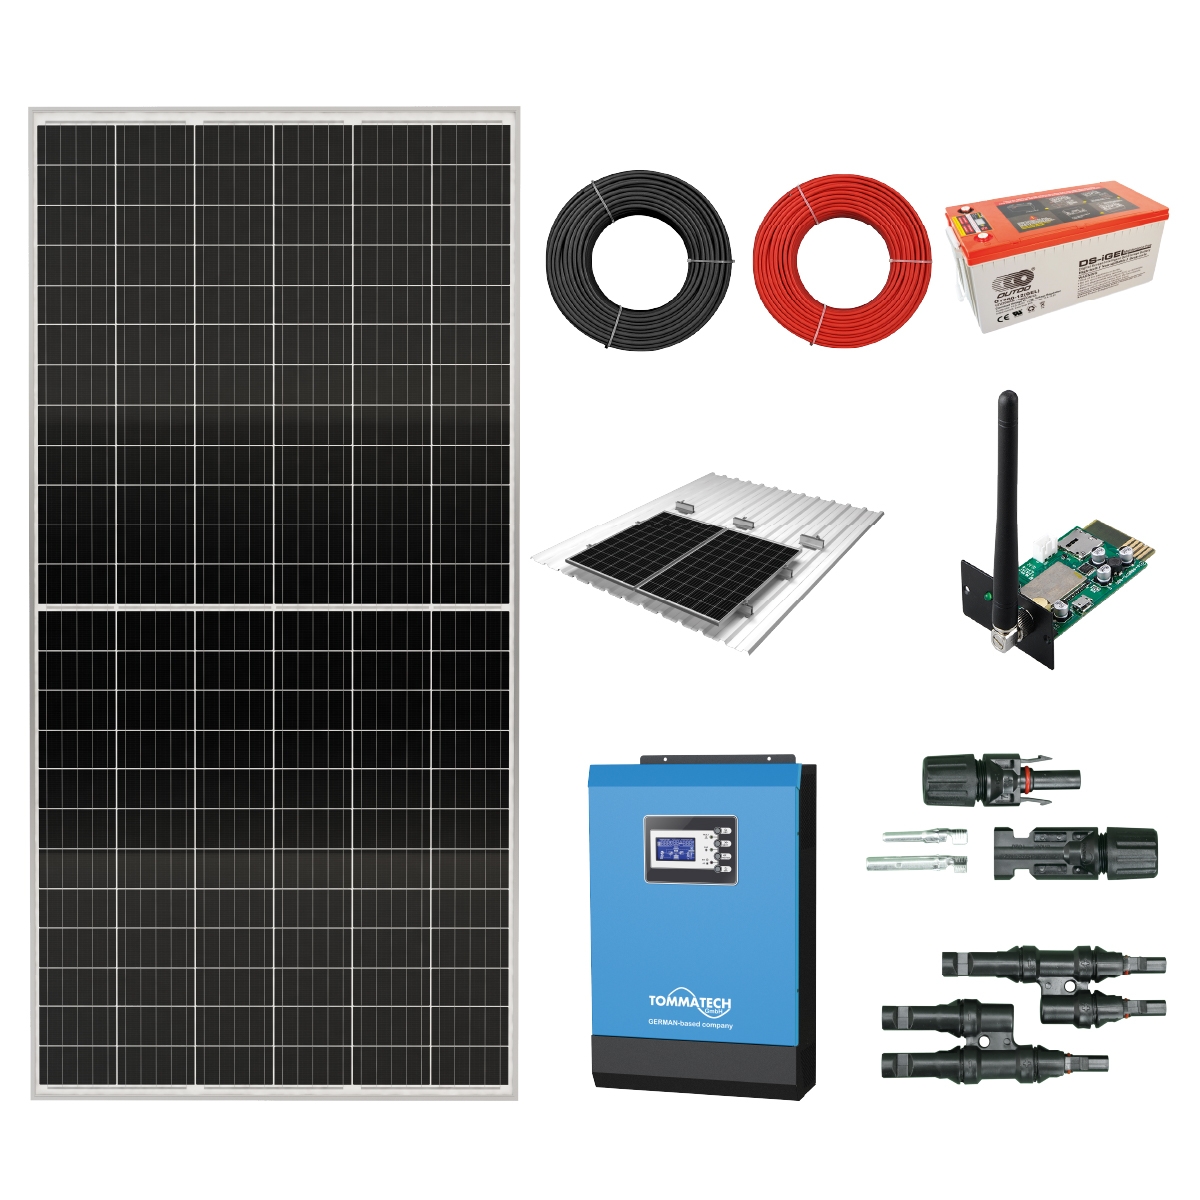 5kW / 1.82kWp / 19.2kWh / 1~ PWM Solar Off-Grid Solution